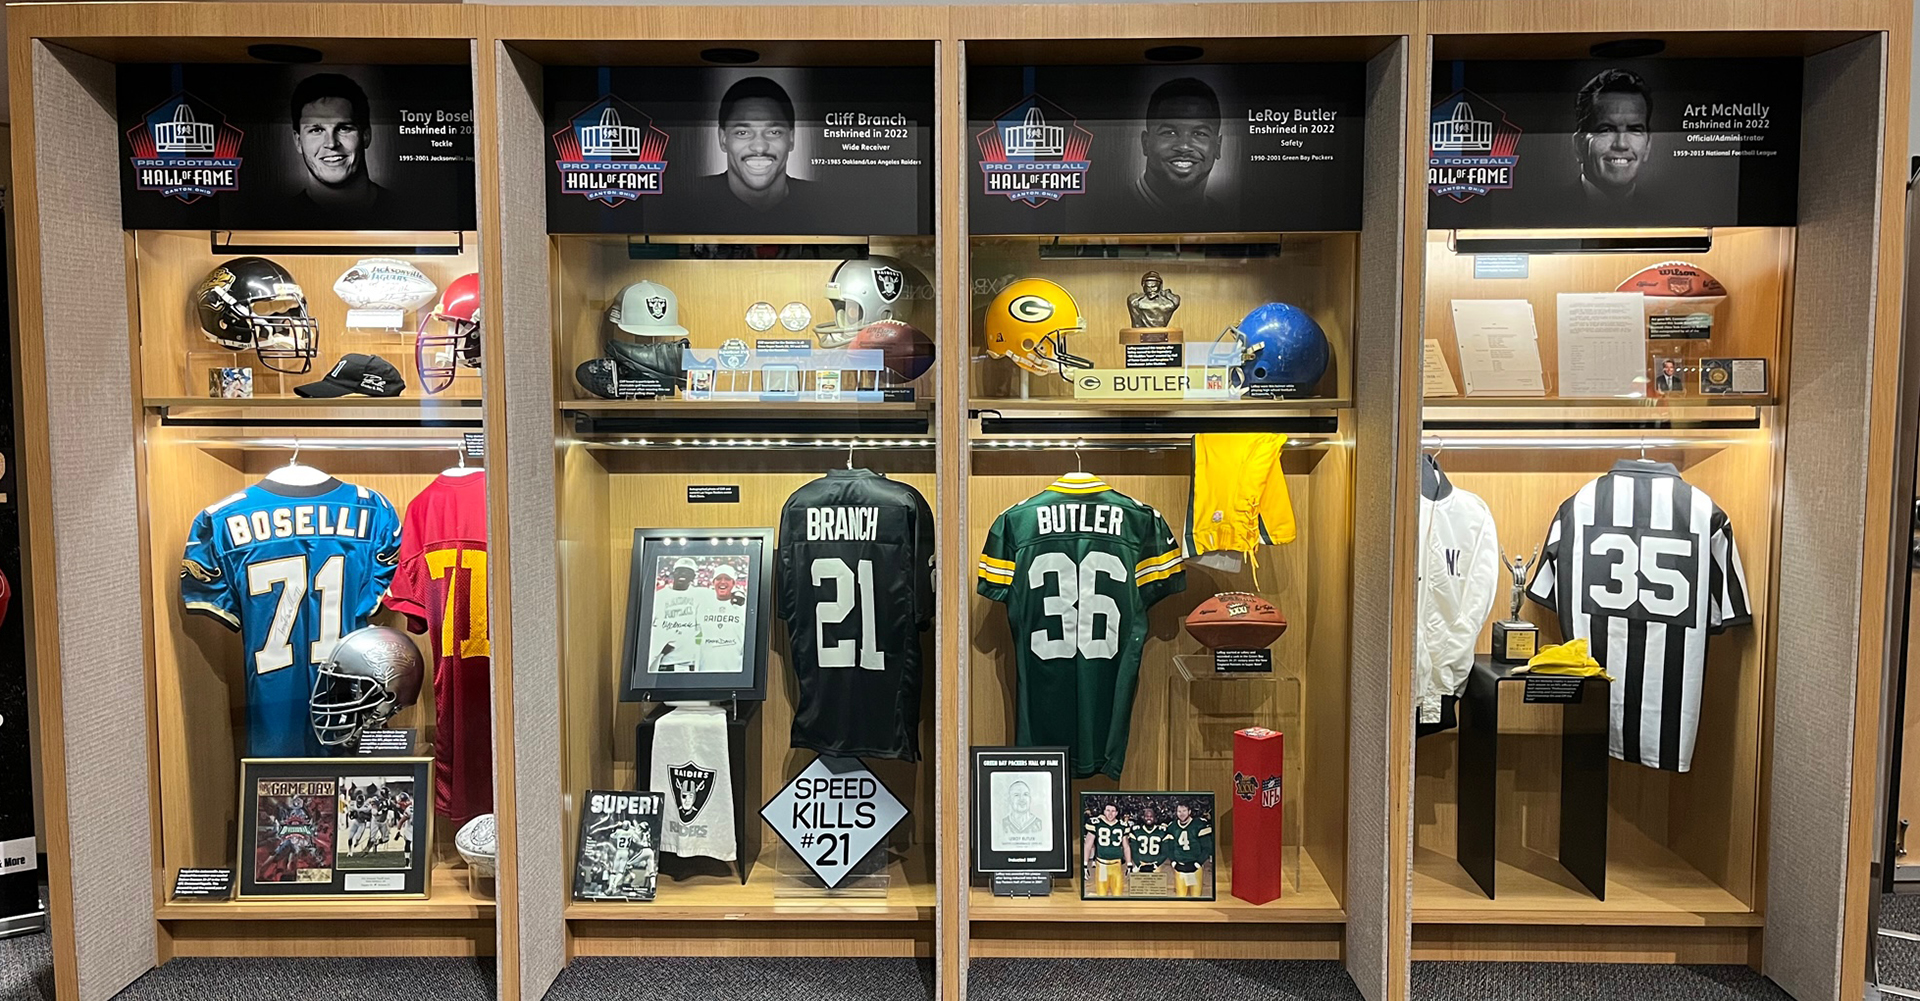 Artifacts from the Pro Football Hall of Fame’s newest class of enshrinees are on display in the latest iteration of the Hall’s “Class Locker Exhibit.”